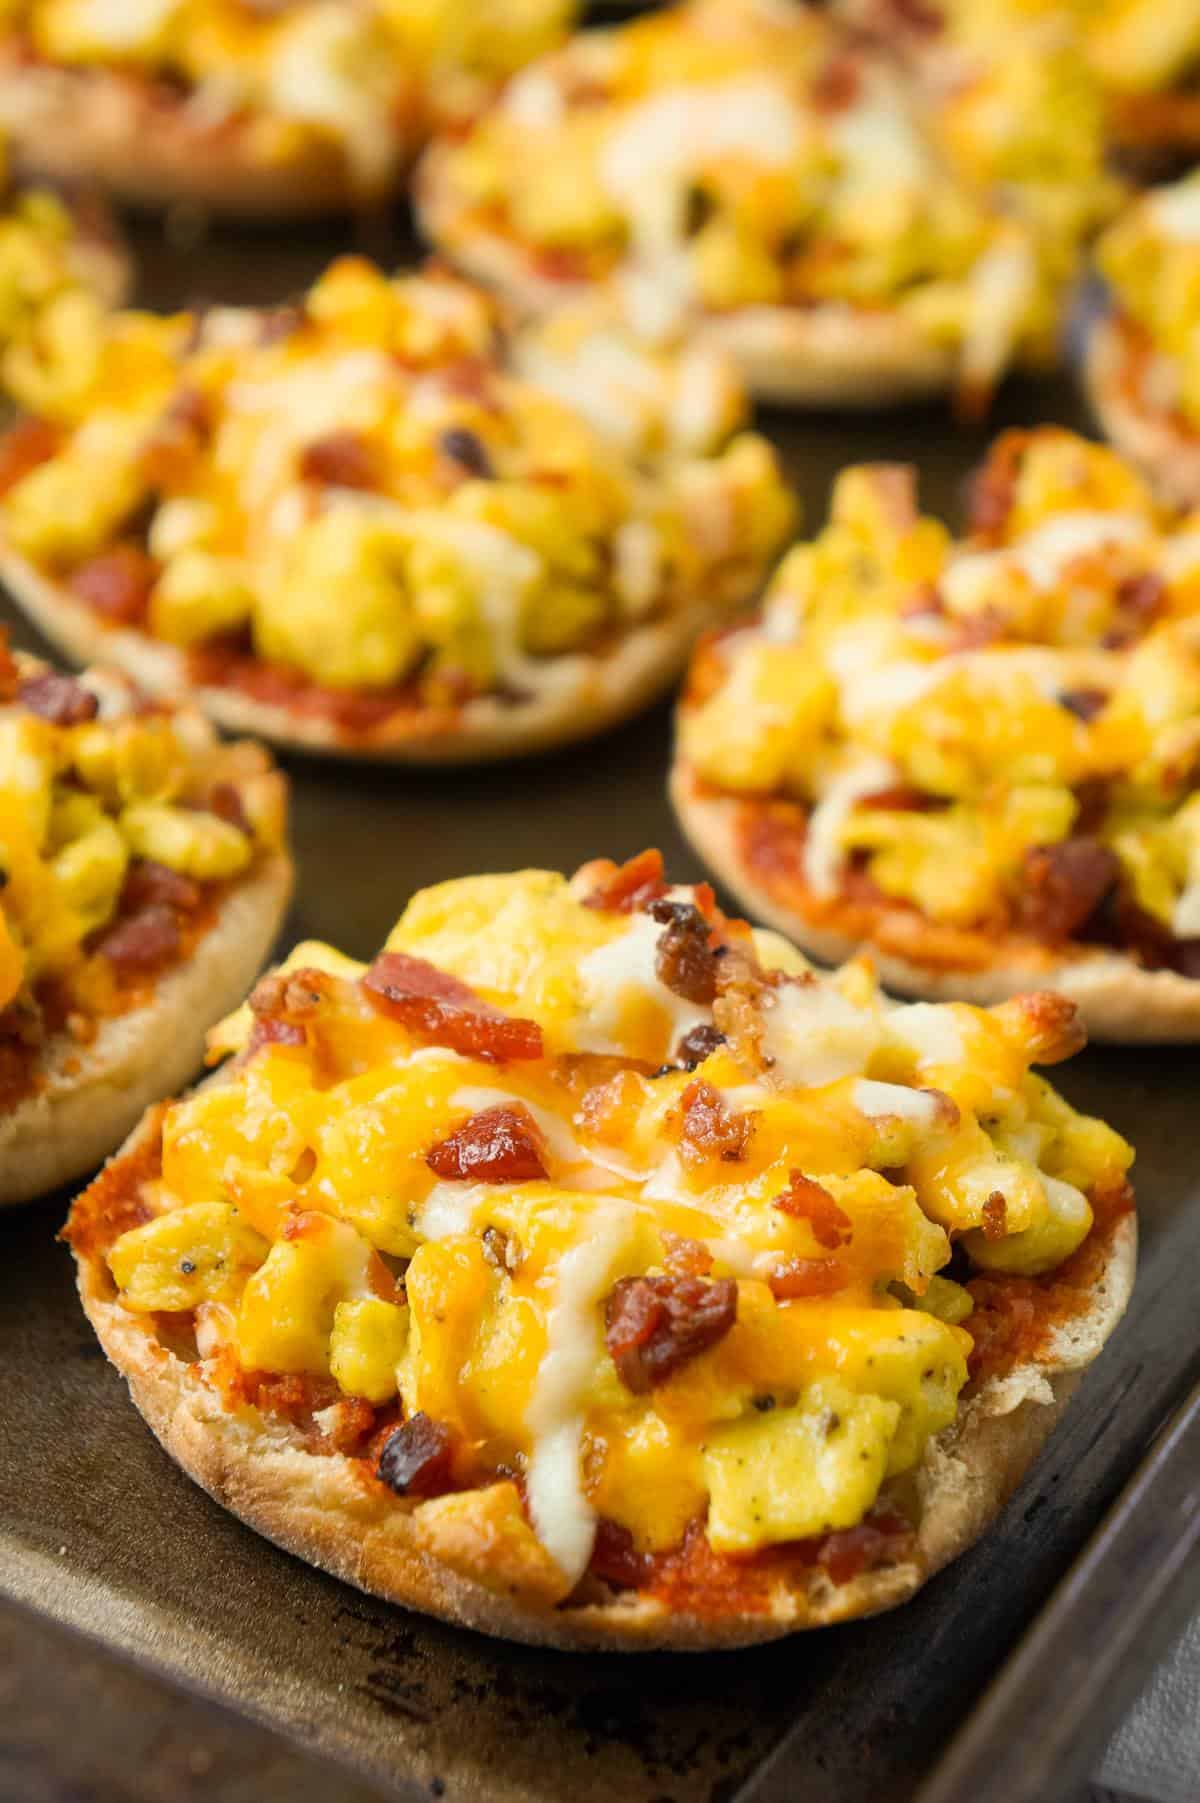 English Muffin Breakfast Pizzas are an easy breakfast or brunch recipe using English muffins and topped with Heinz chili sauce, scrambled eggs, crumbled bacon and shredded cheese.